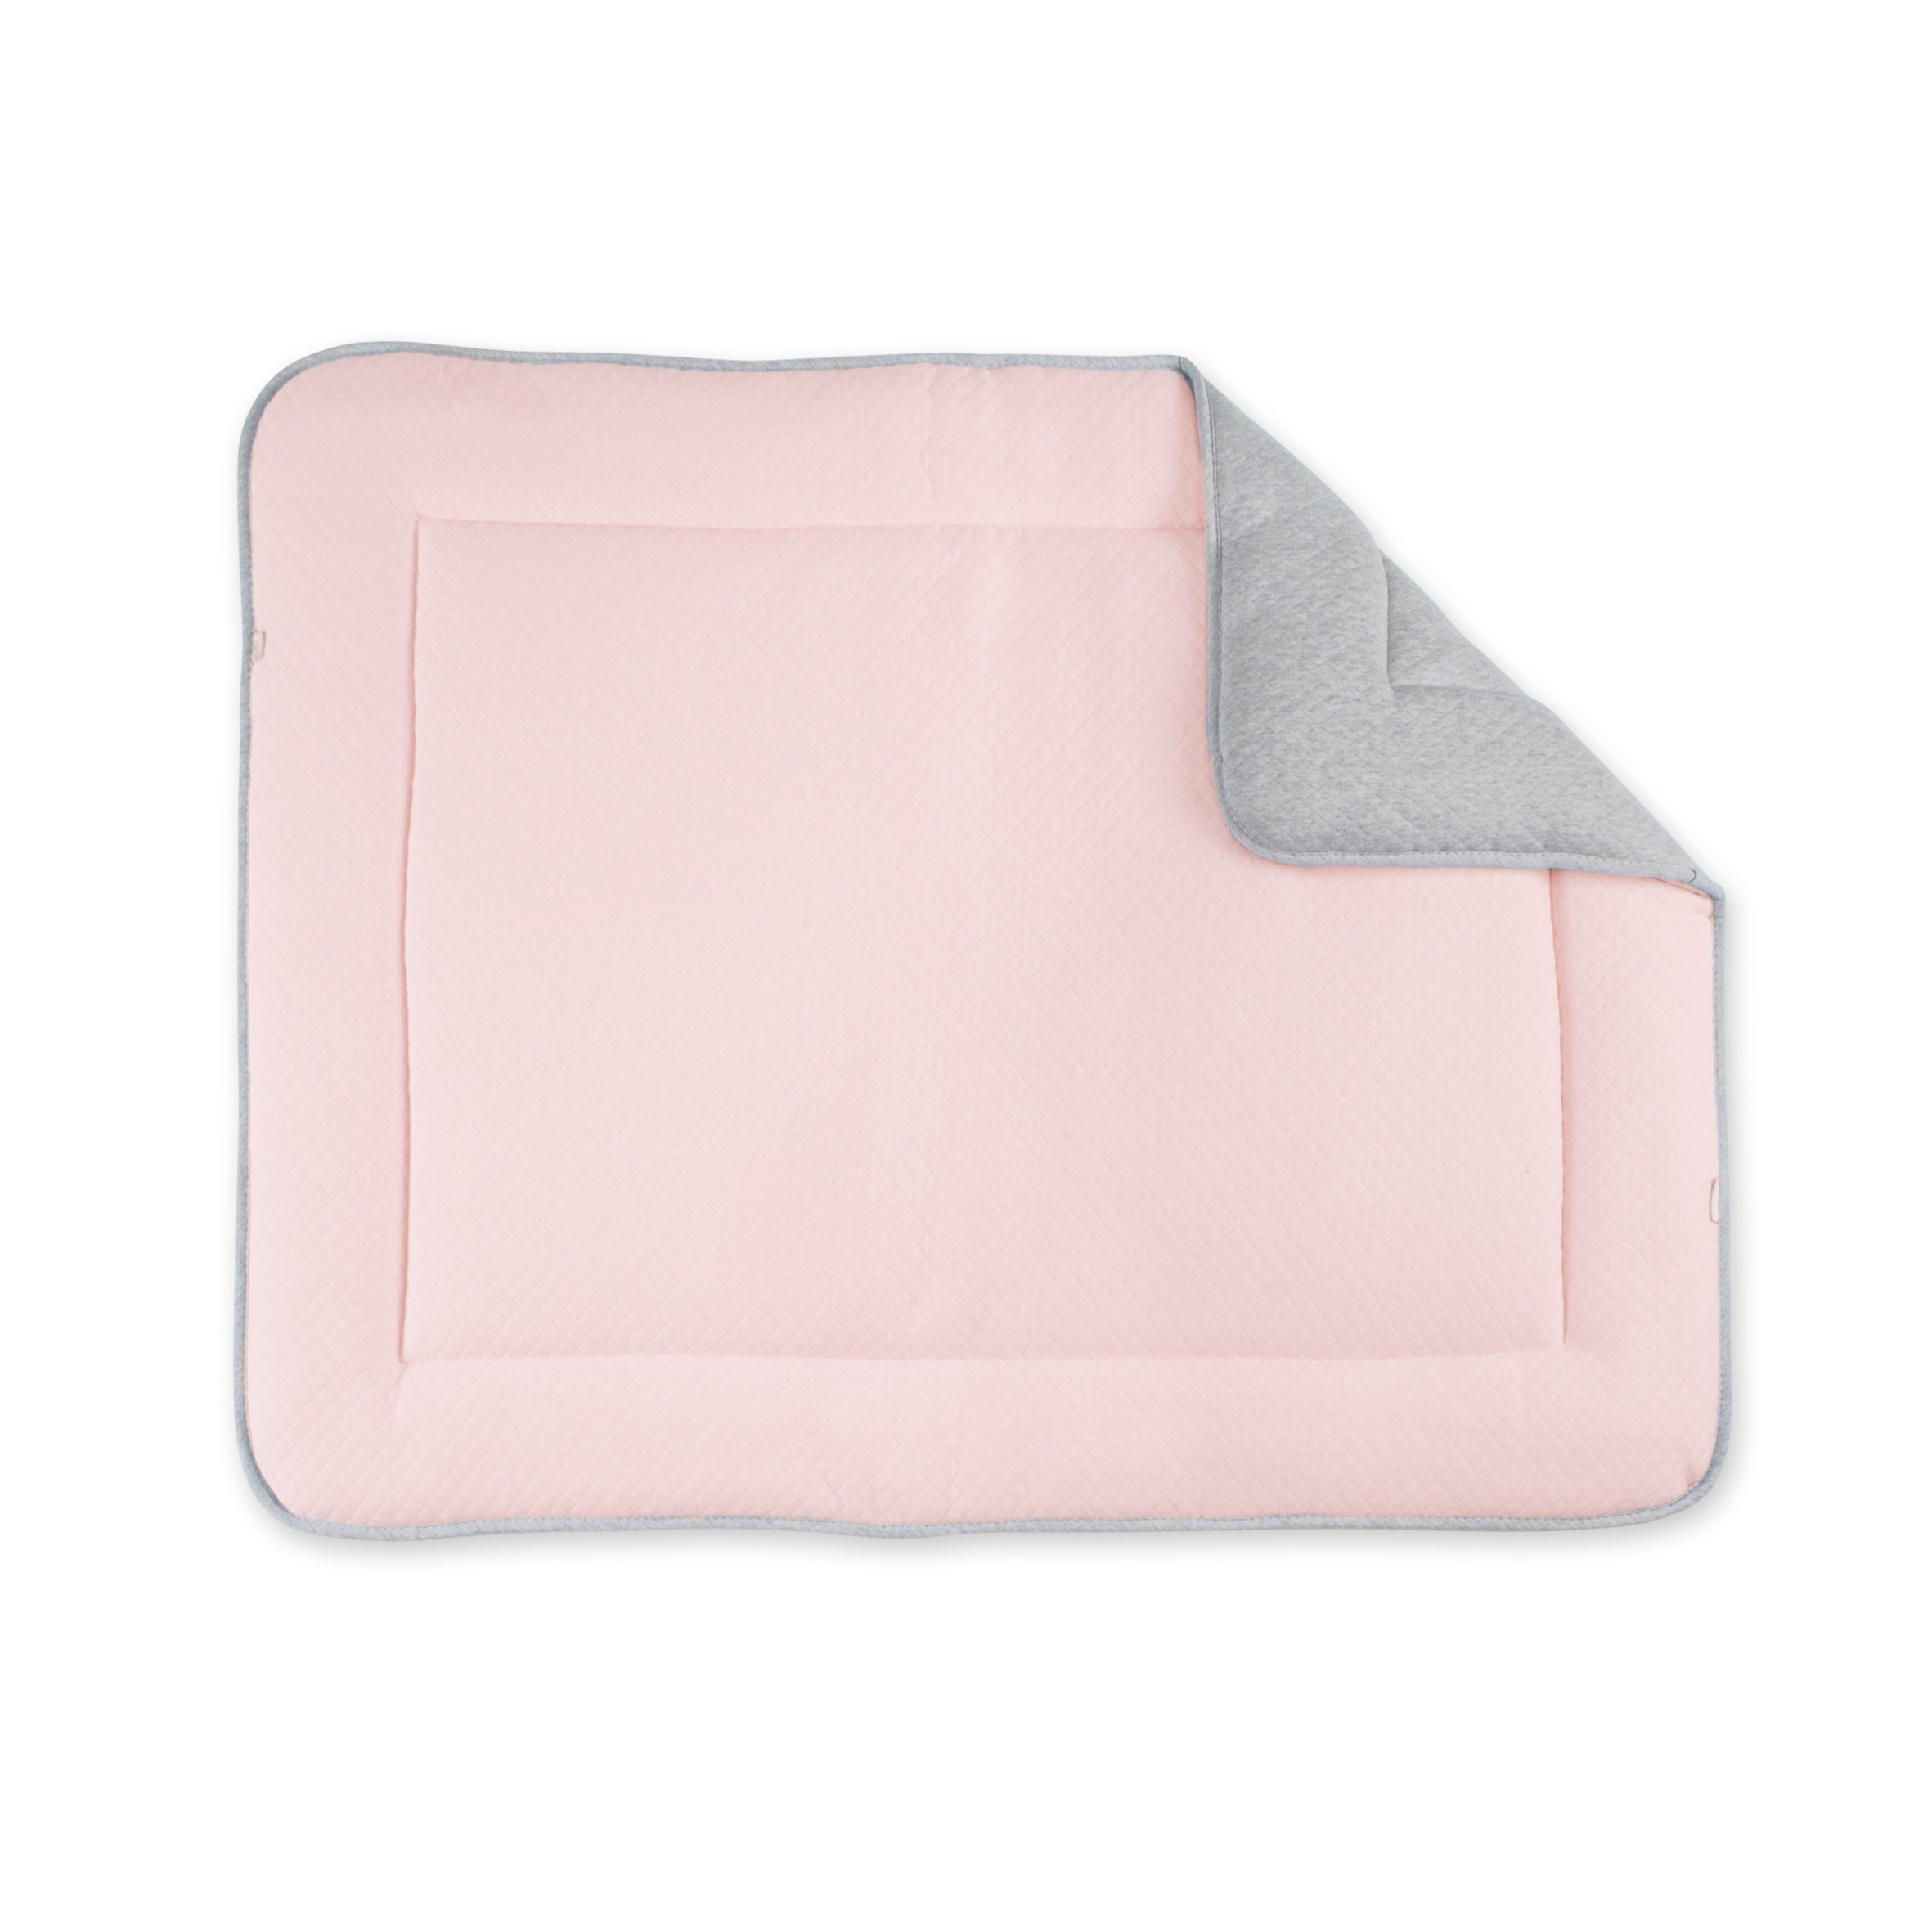 Padded play mat Pady quilted jersey 75x95cm BEMINI Pink